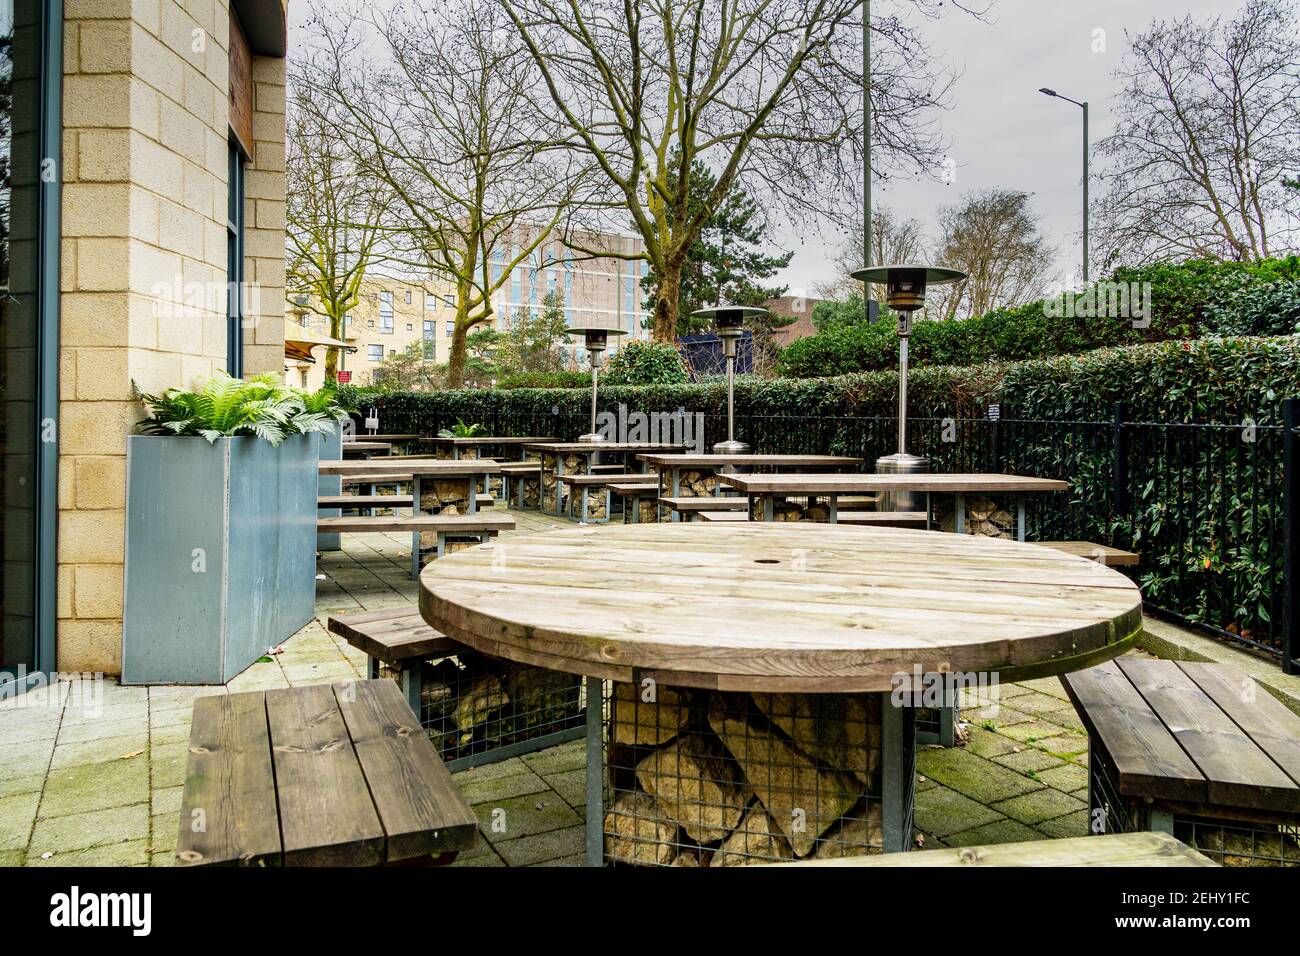 An empty pub beer garden during the covid19 lockdown in London, UK. Patio heaters and wooden bench and tables surrounded by green plants. Stock Photo